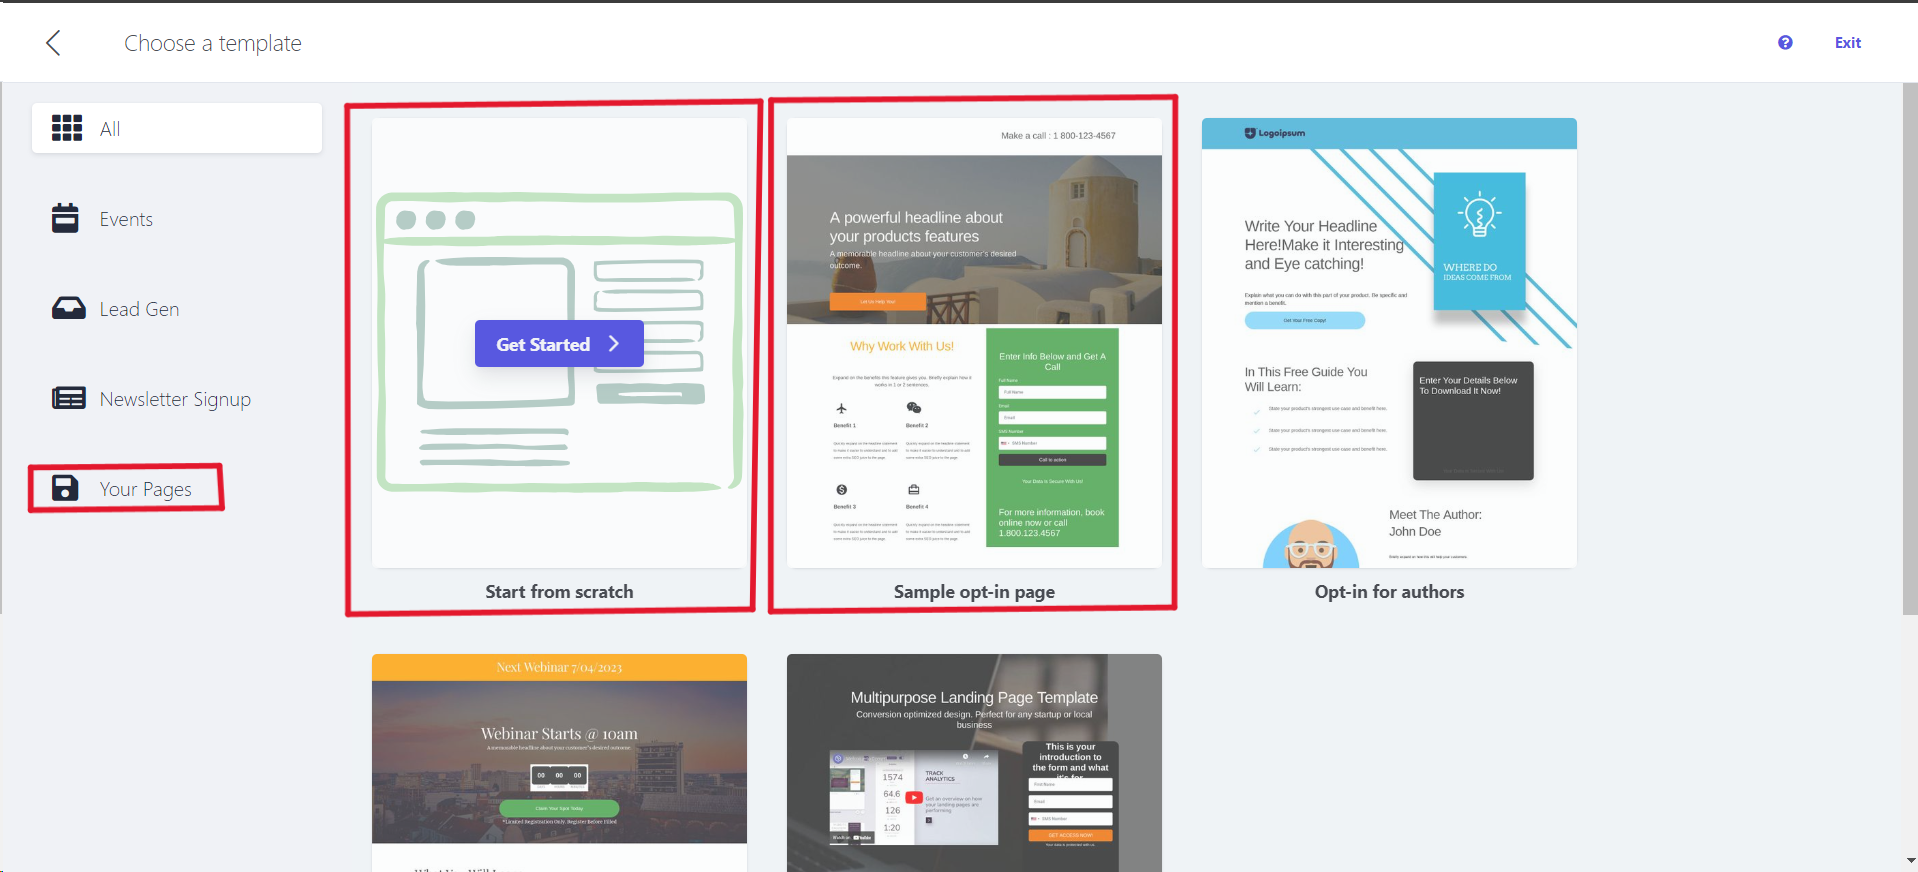 Options on how to create a landing page